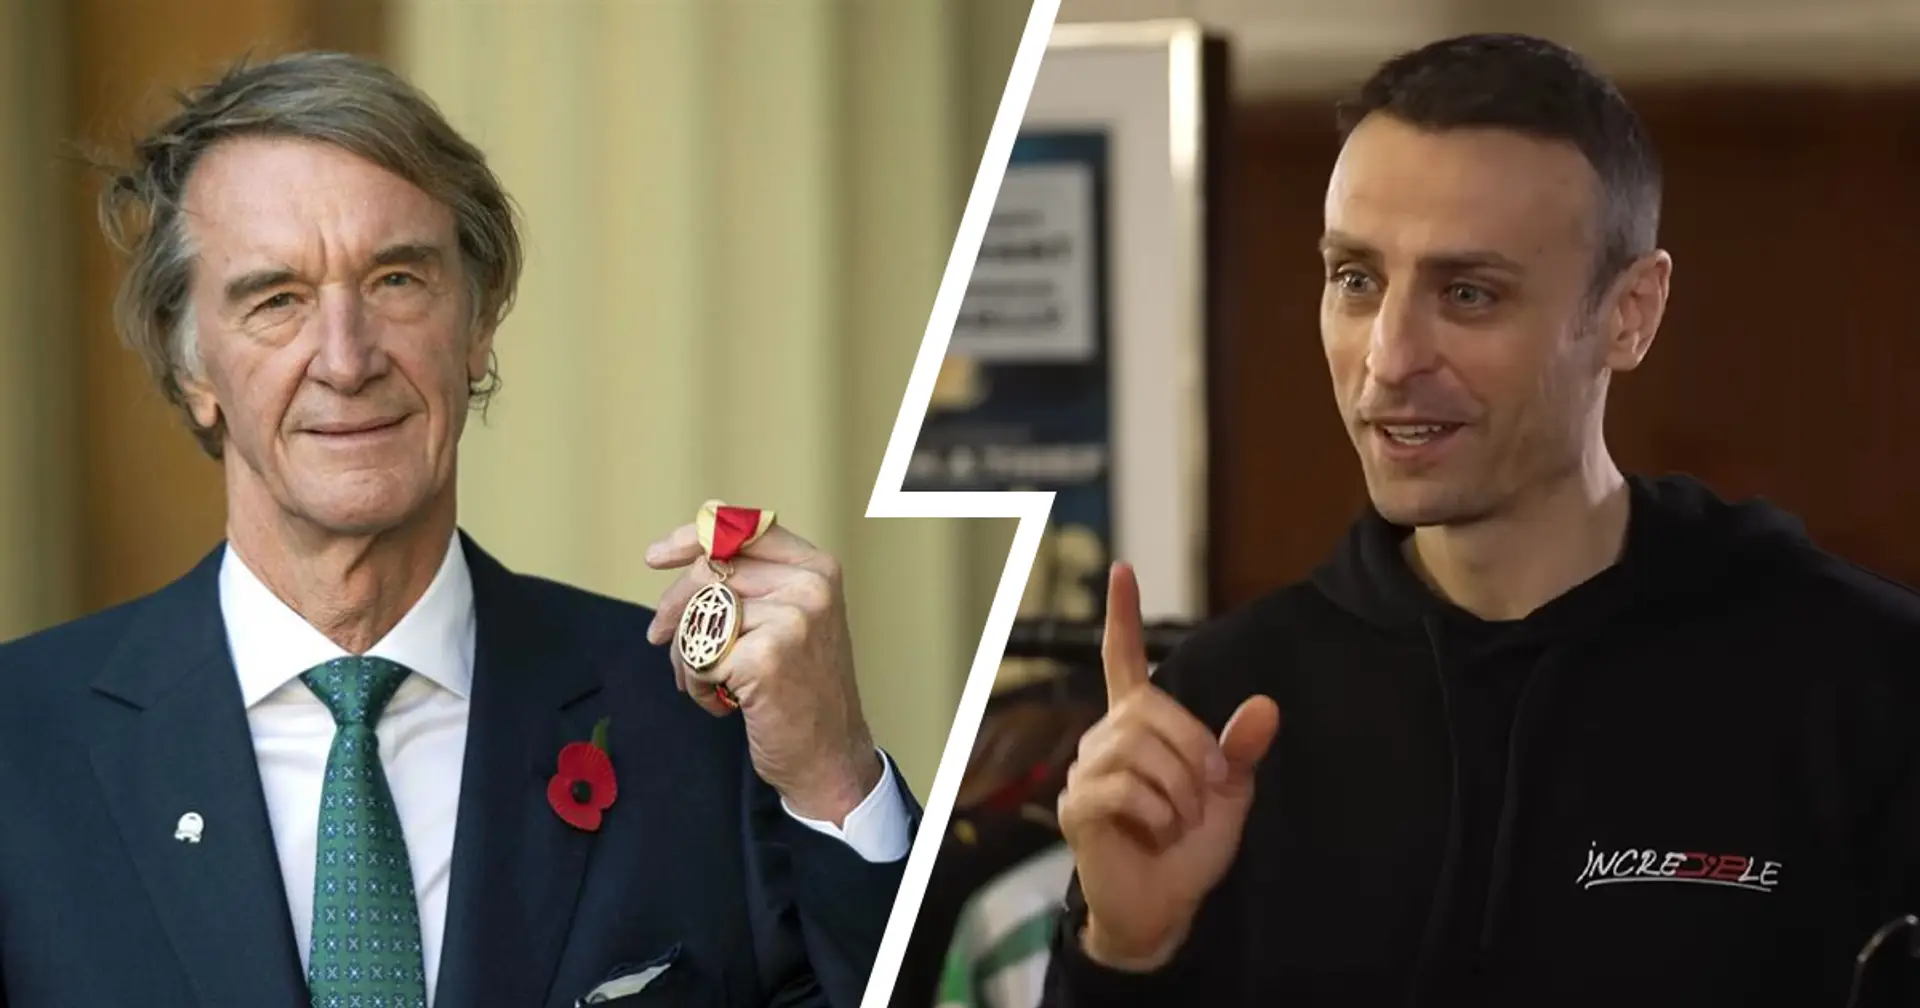 'He's someone who fits perfectly': Dimitar Berbatov wants Sir Jim Ratcliffe to replace Casemiro with Bayern star